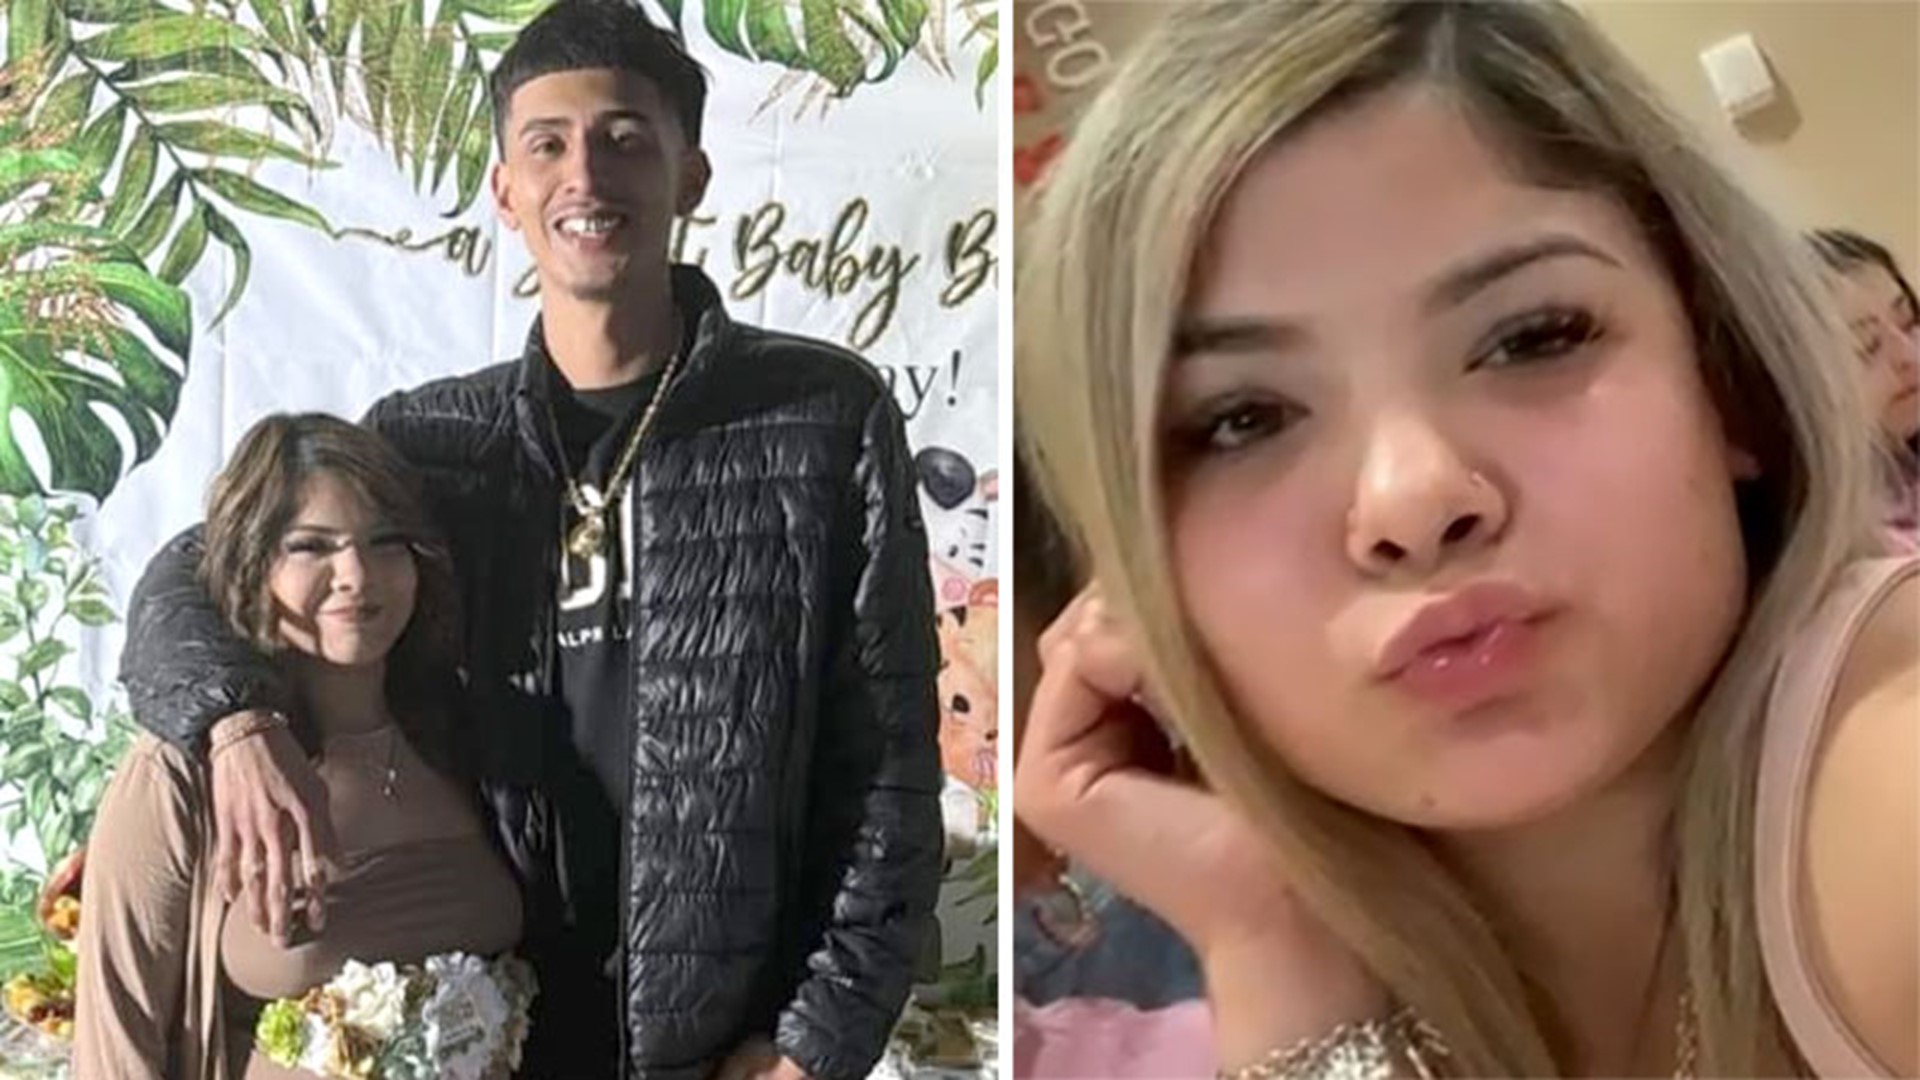 Savanah Nicole Soto was a week past her due date when she failed to show up at the hospital Saturday to begin labor. Matthew Guerra also was listed as missing.